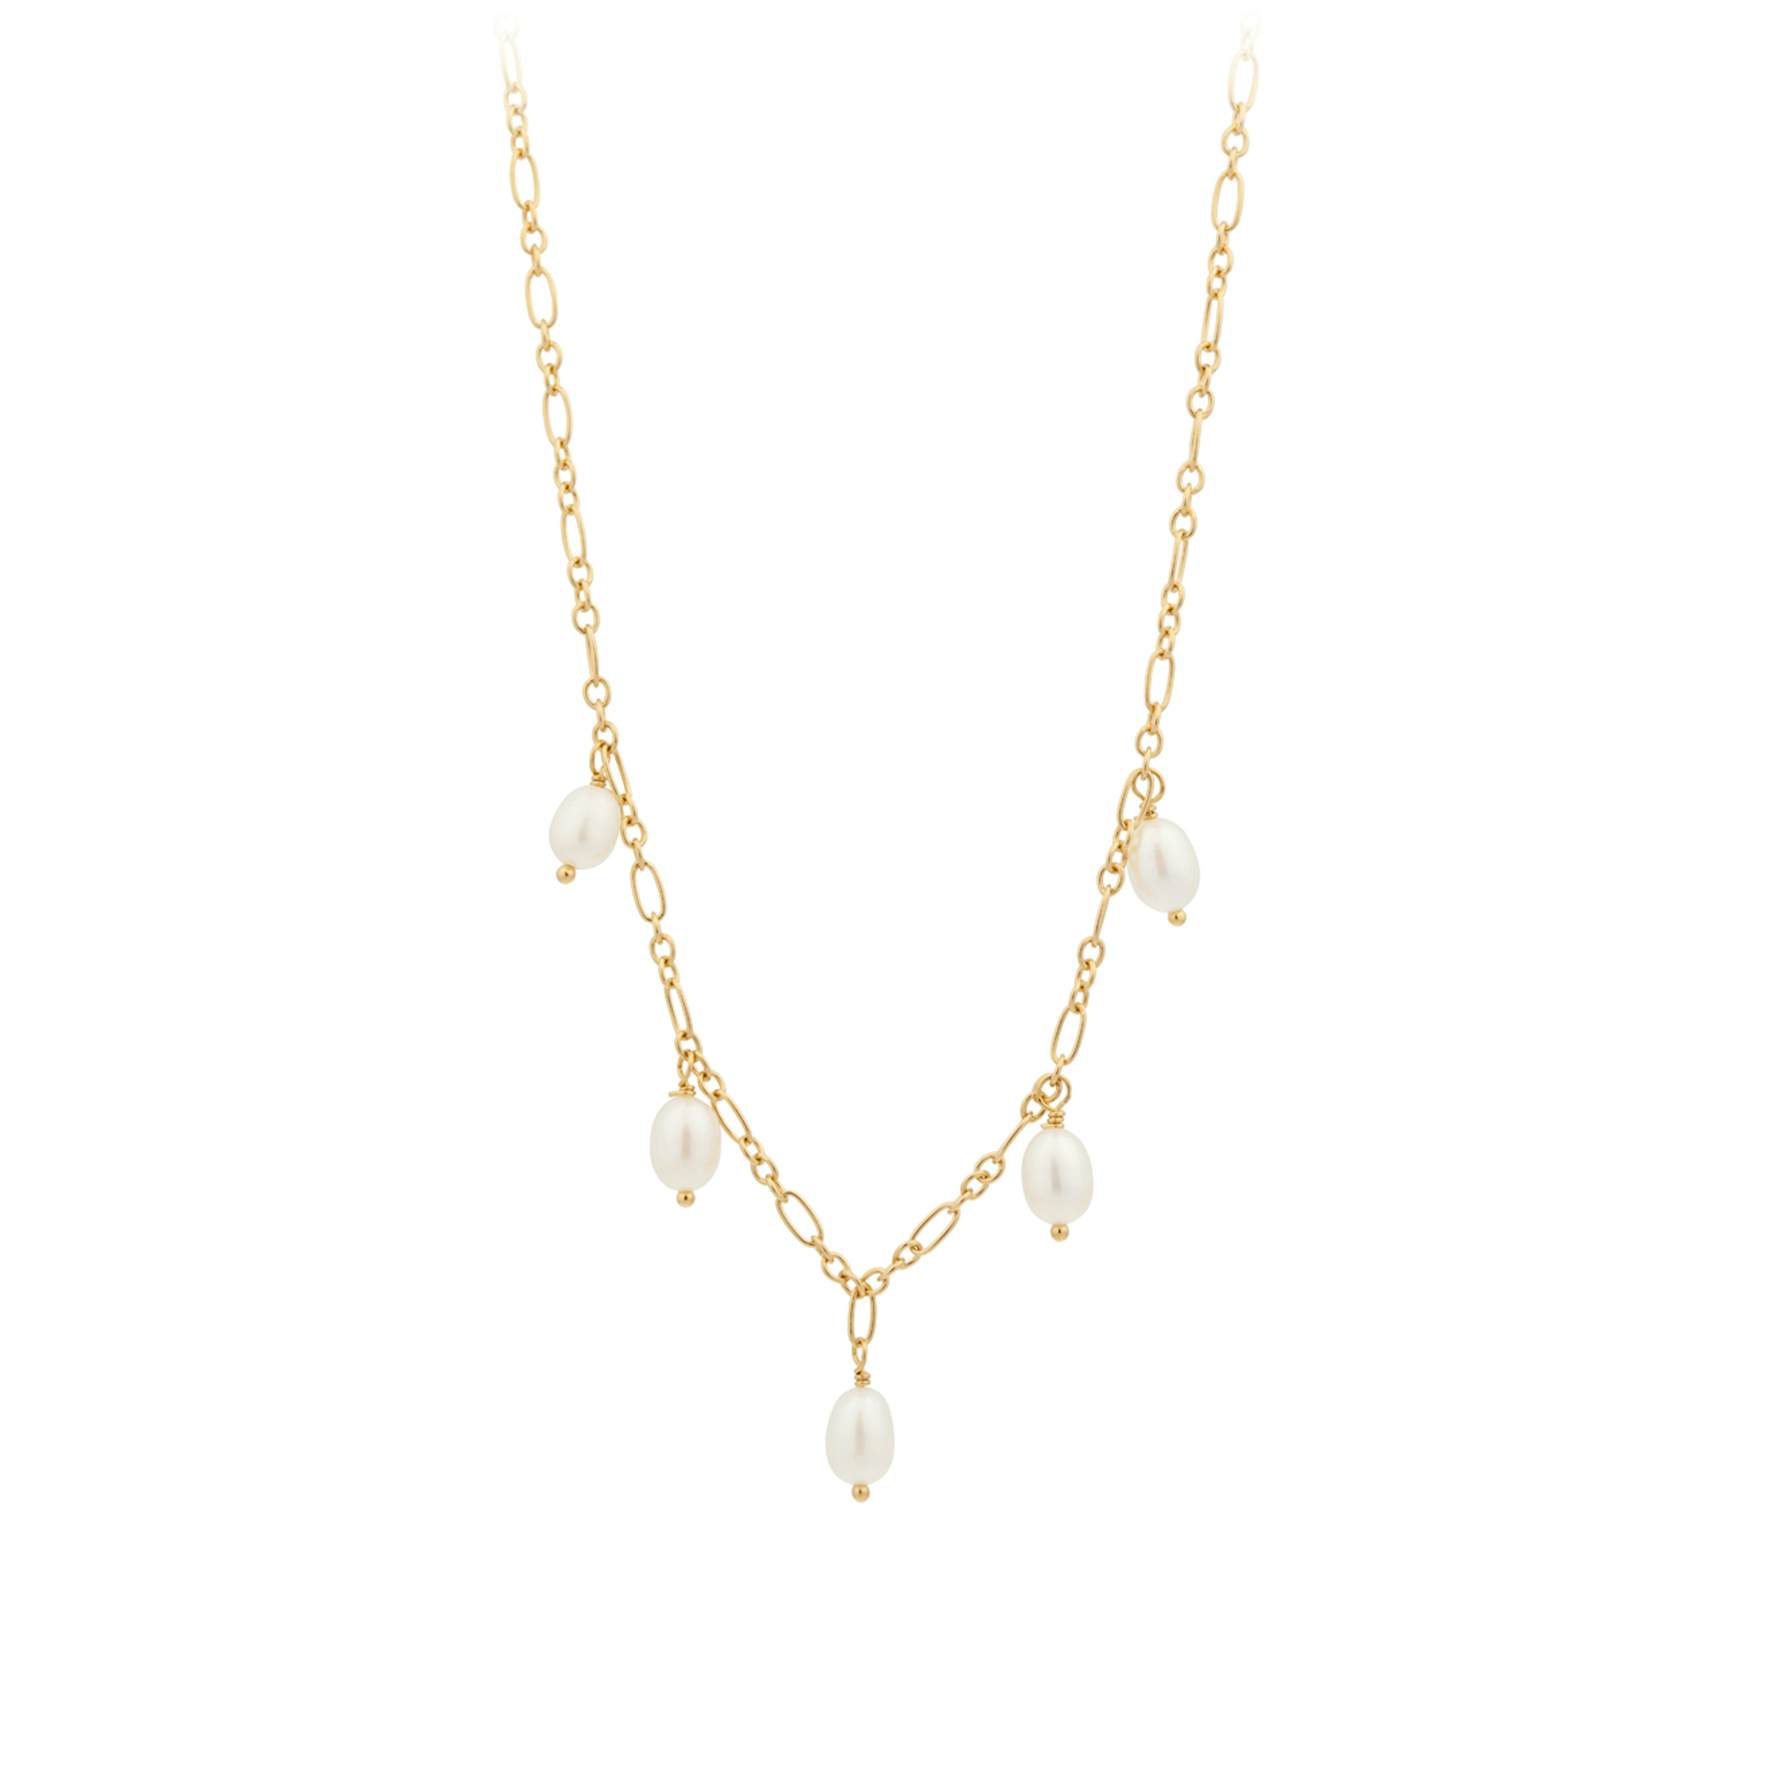 Ocean Dream Necklace from Pernille Corydon in Goldplated-Silver Sterling 925|Freshwater Pearl